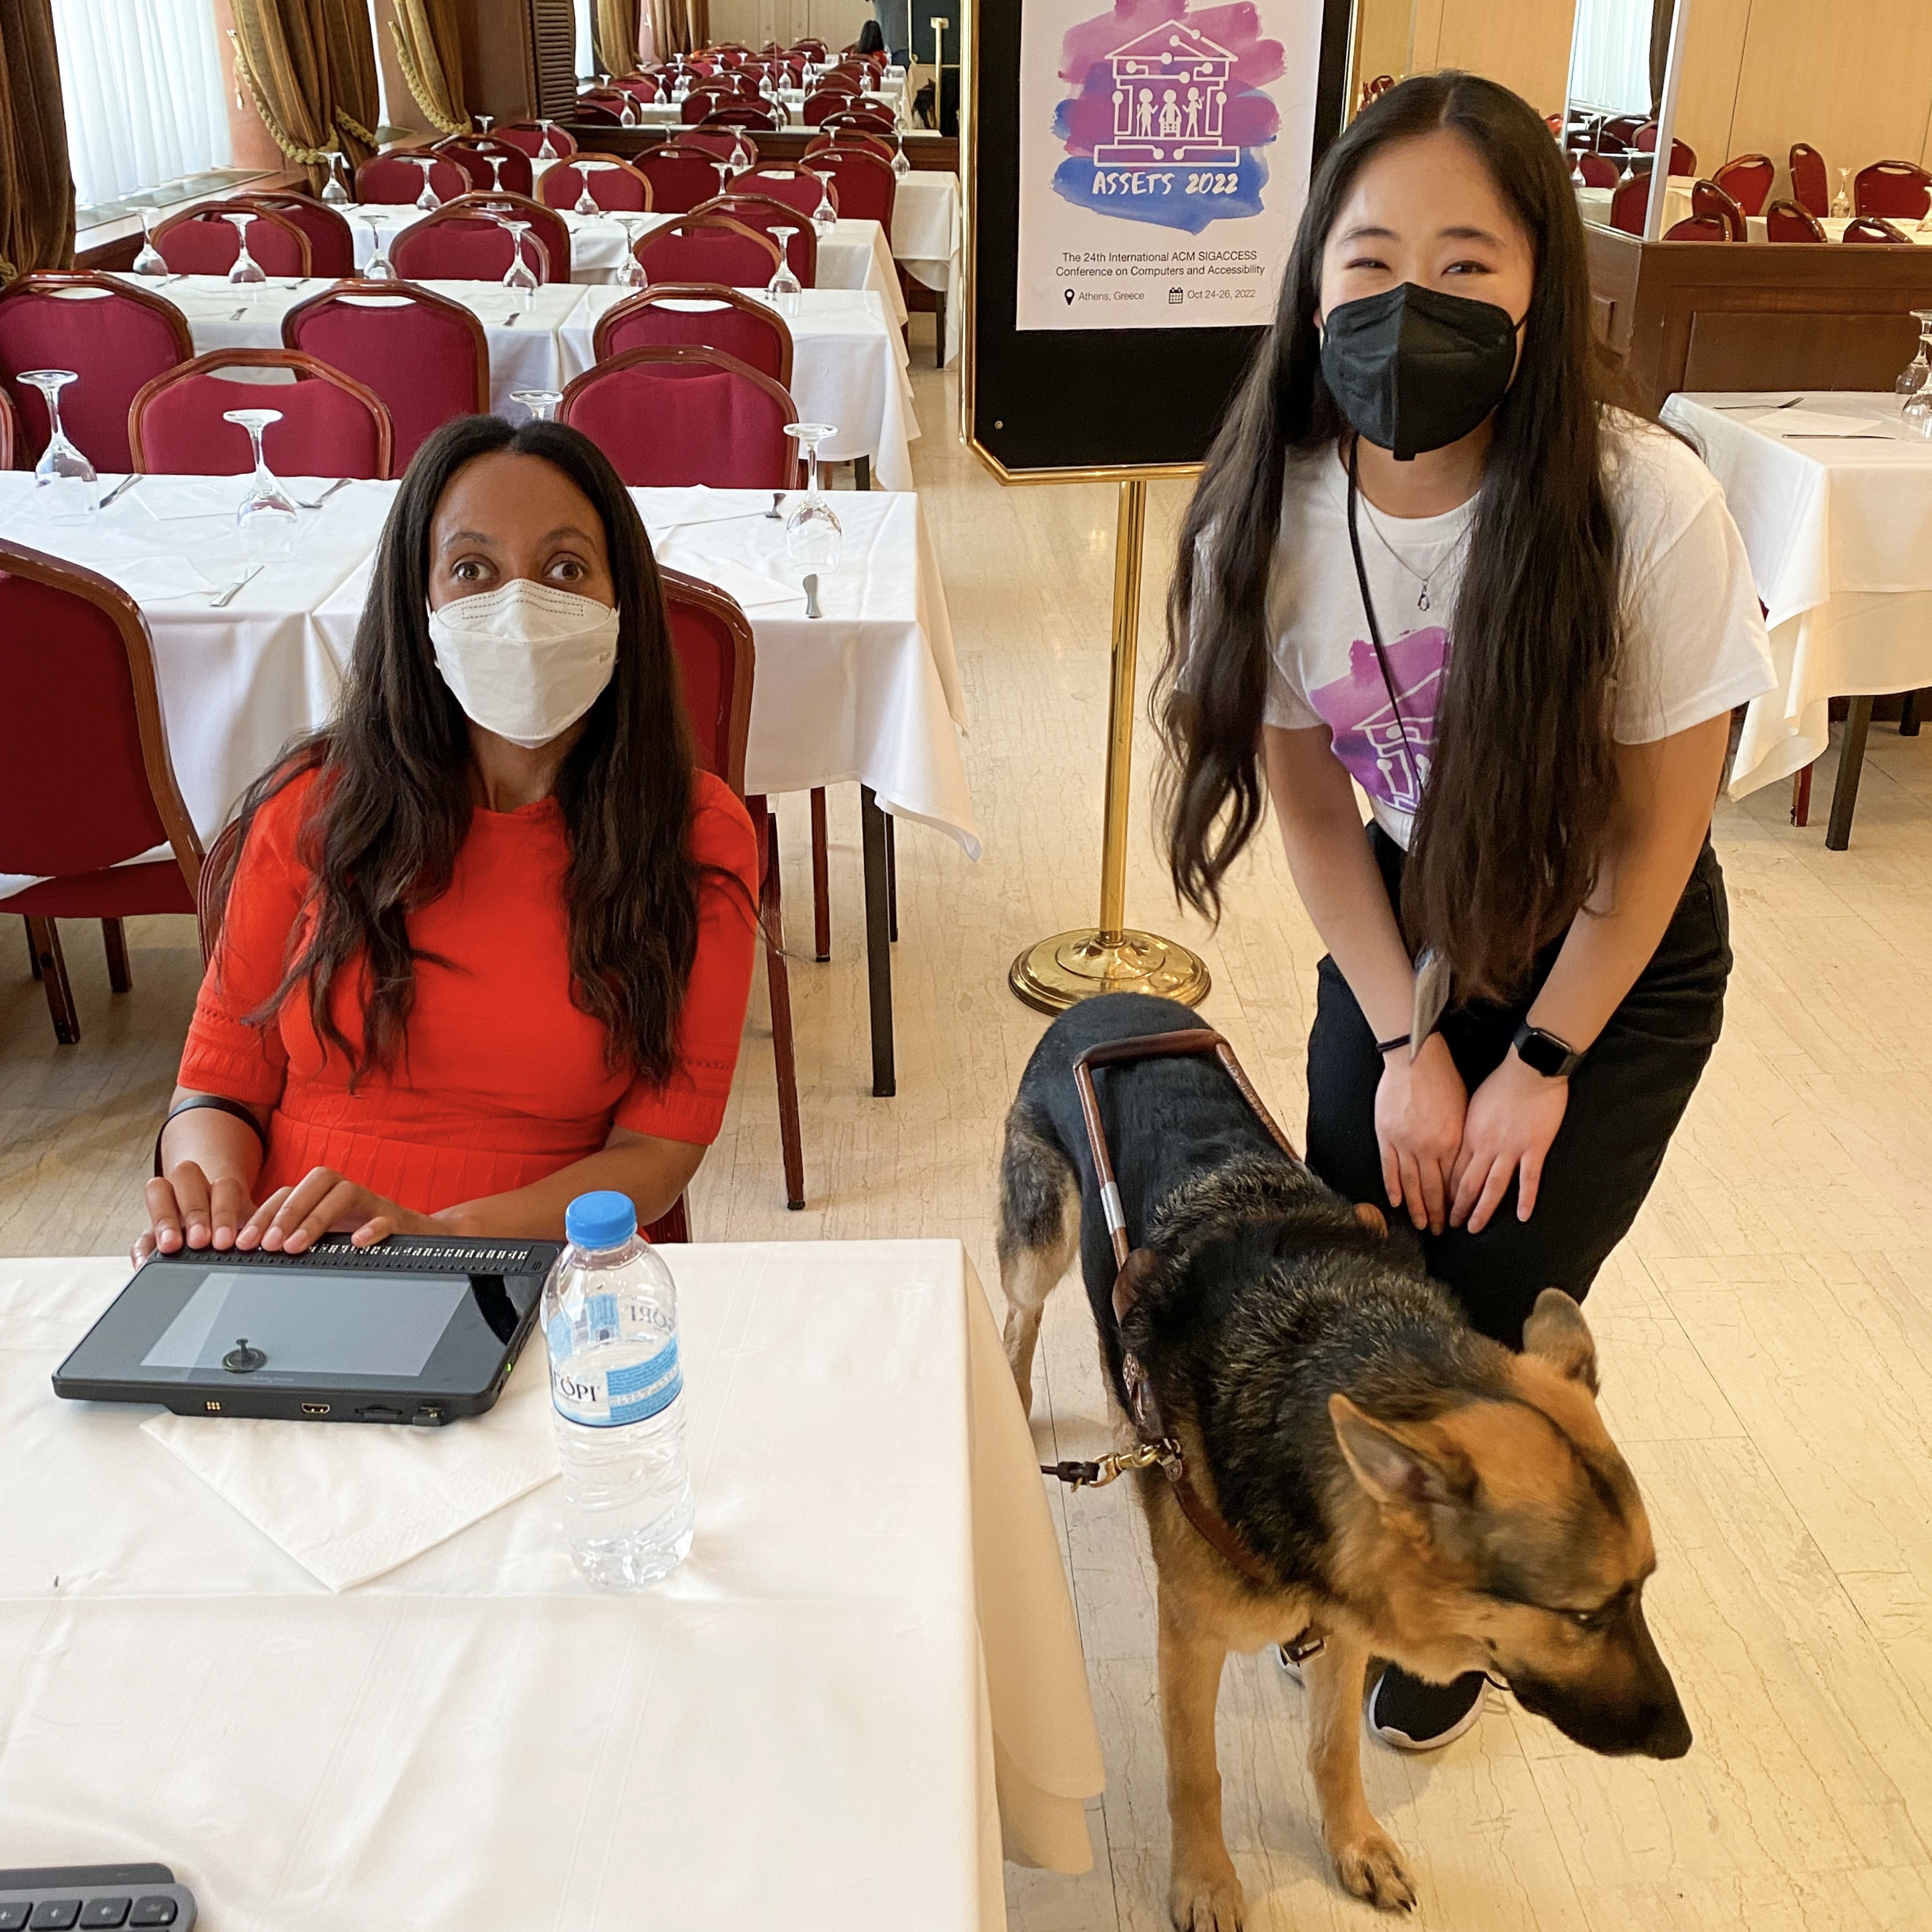 Haben Girma wears a red dress and sits at a table with her Braille display. Lucy, wearing an ASSETS shirt, stands next to her. Both are wearing masks. Mylo, Haben's Seeing Eye dog, stands between them.